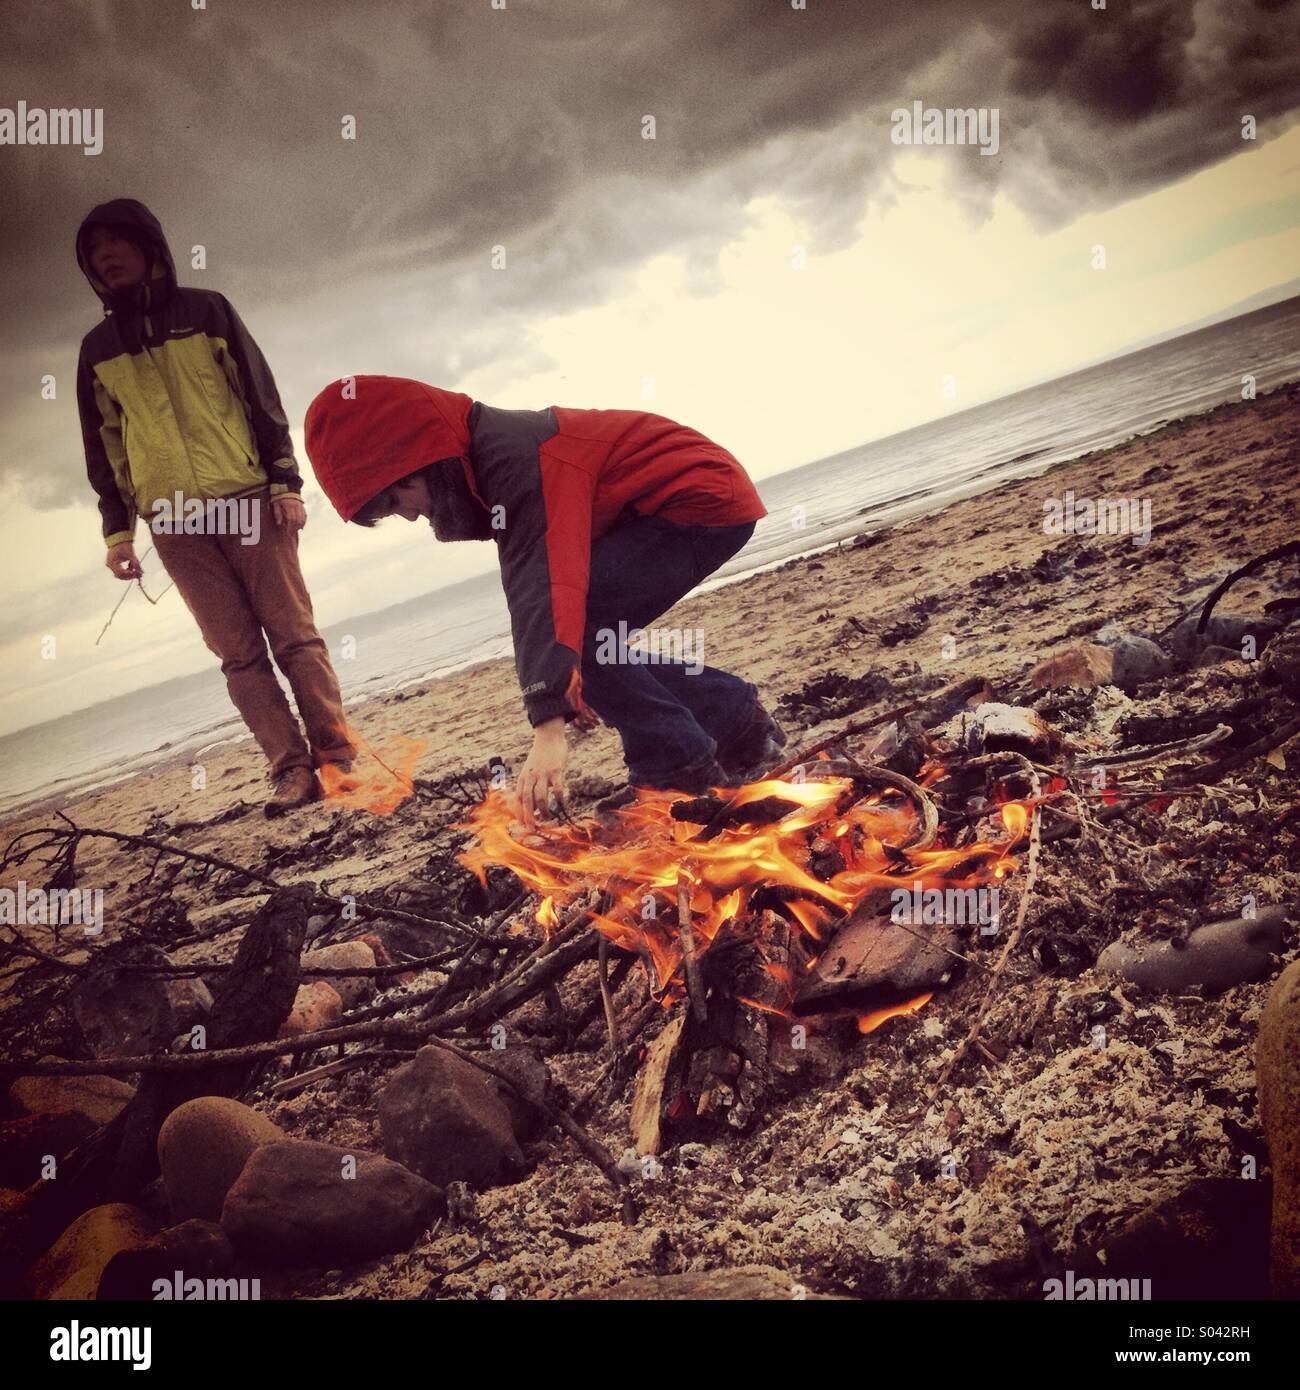 Mother and child on beach, with camp fire. Stock Photo